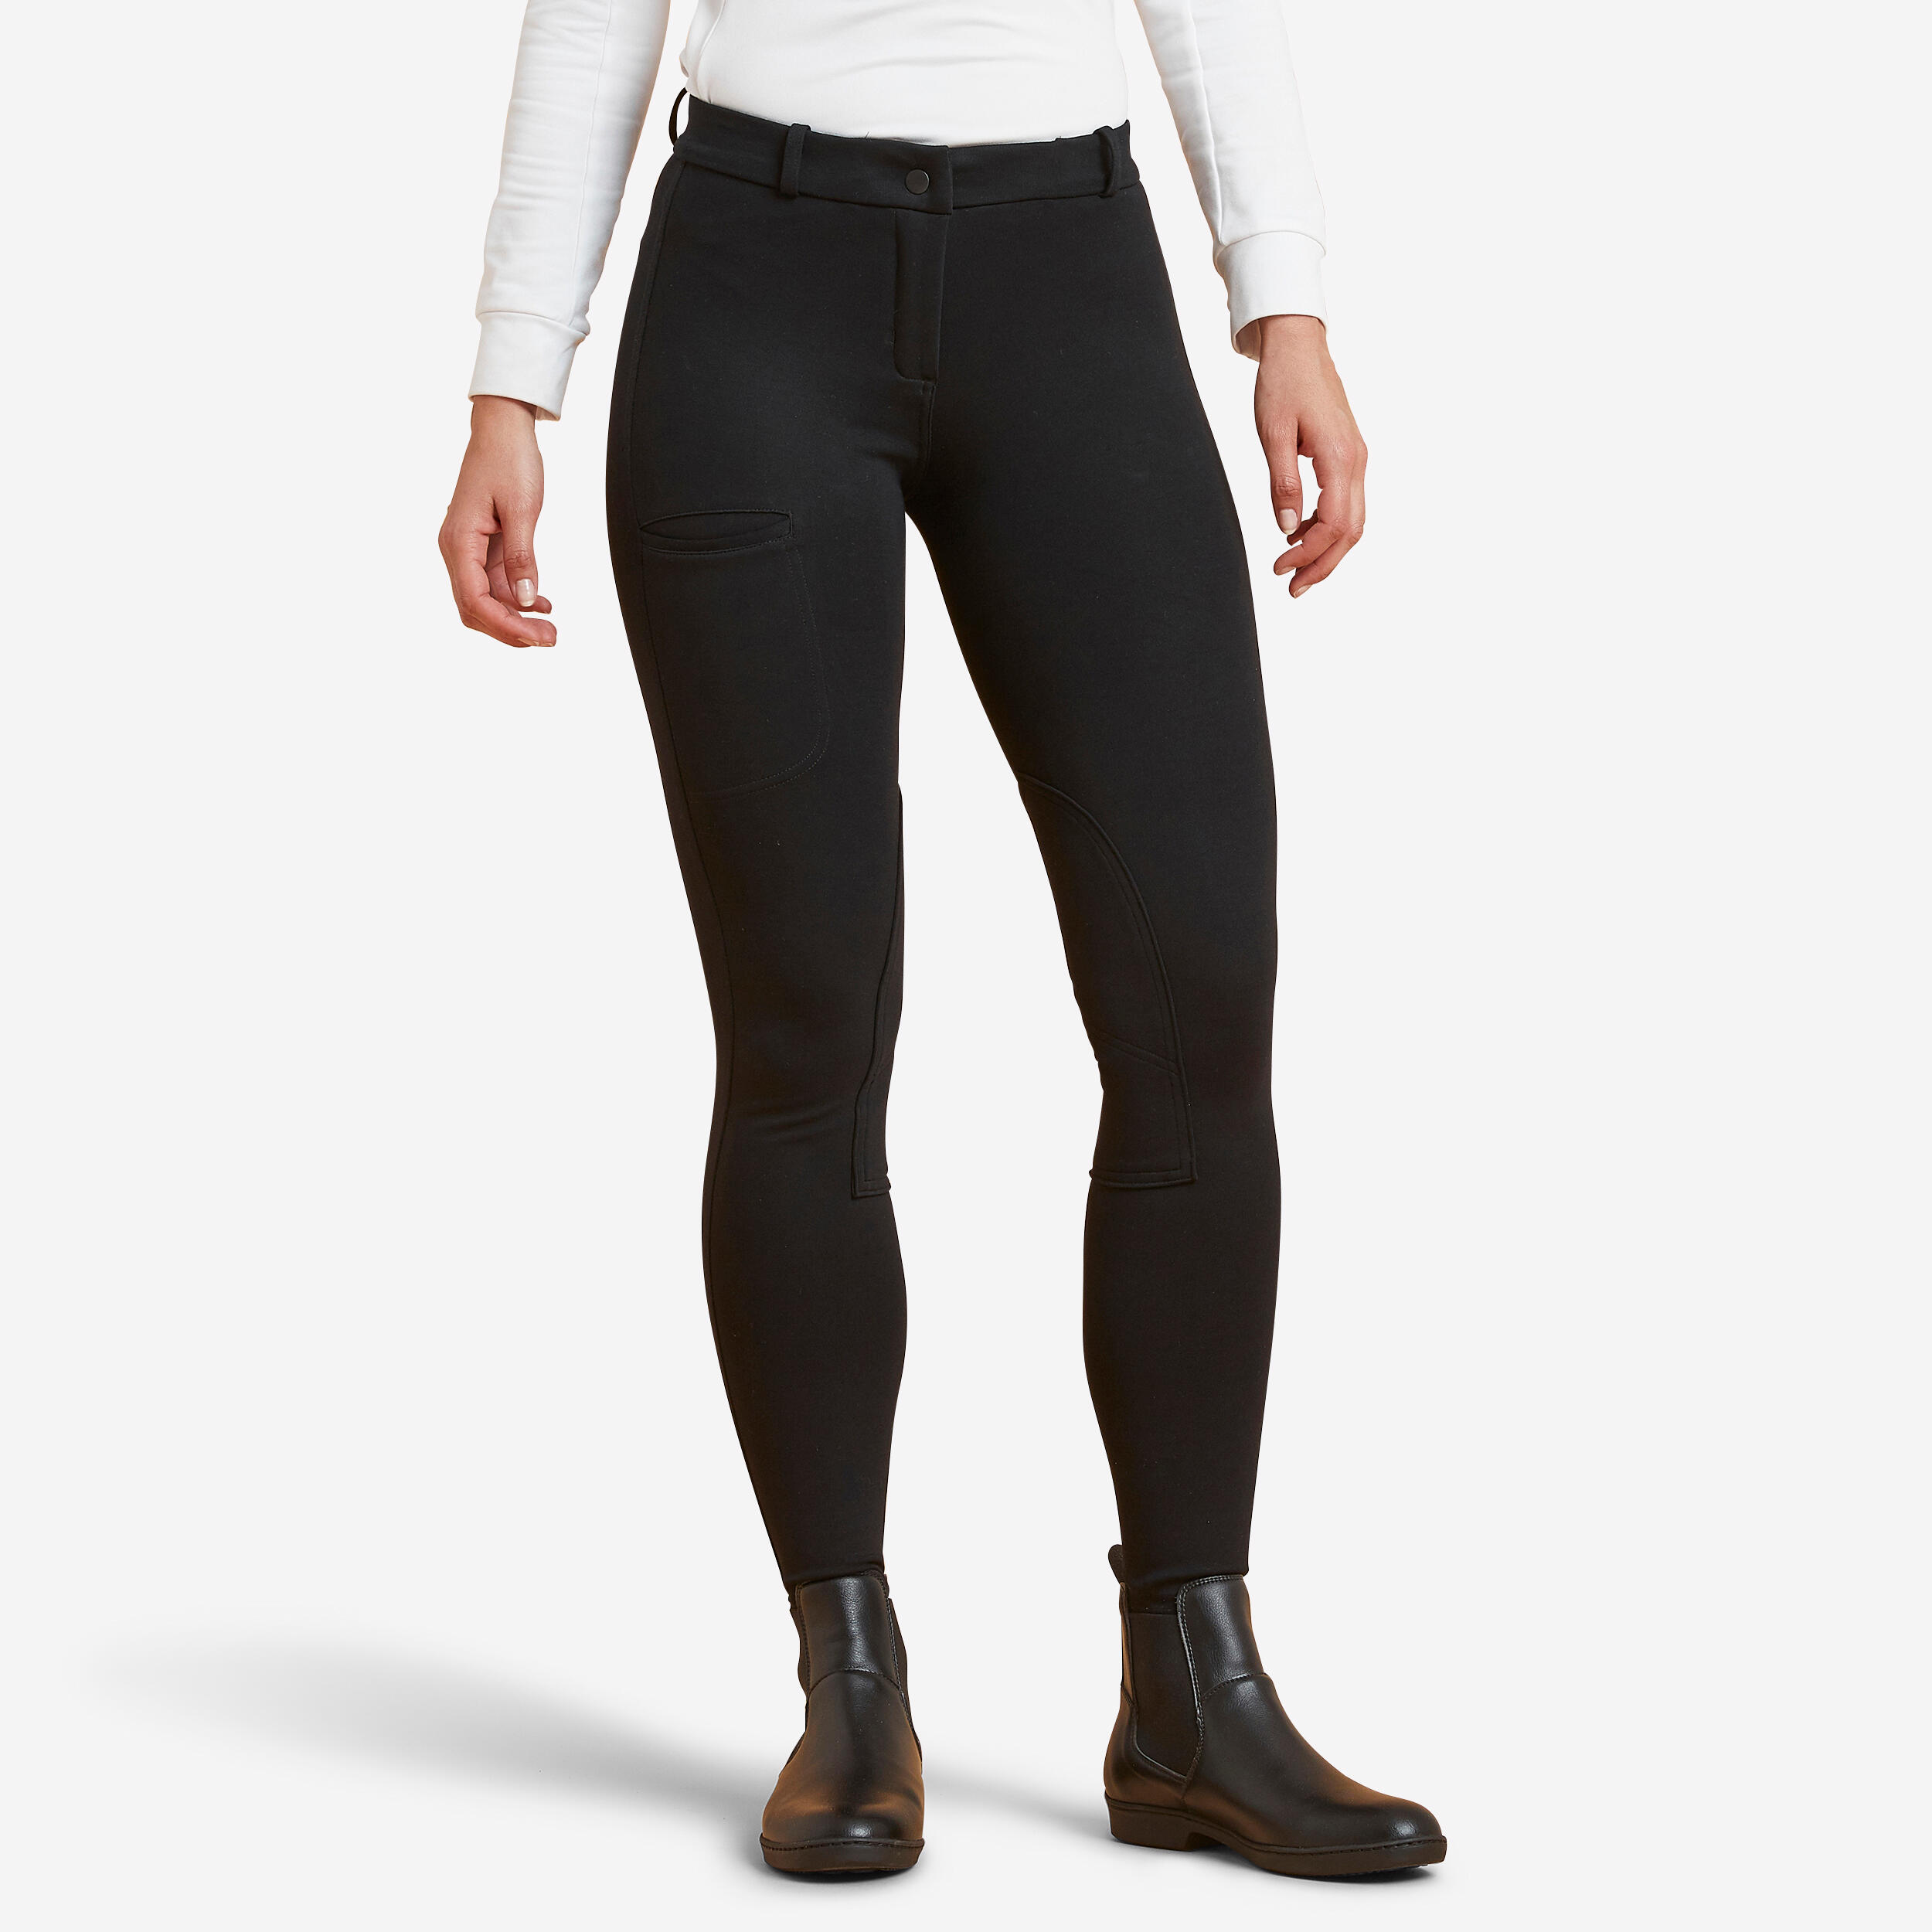 Riding breeches and tights | Back on Track - Back on Track USA